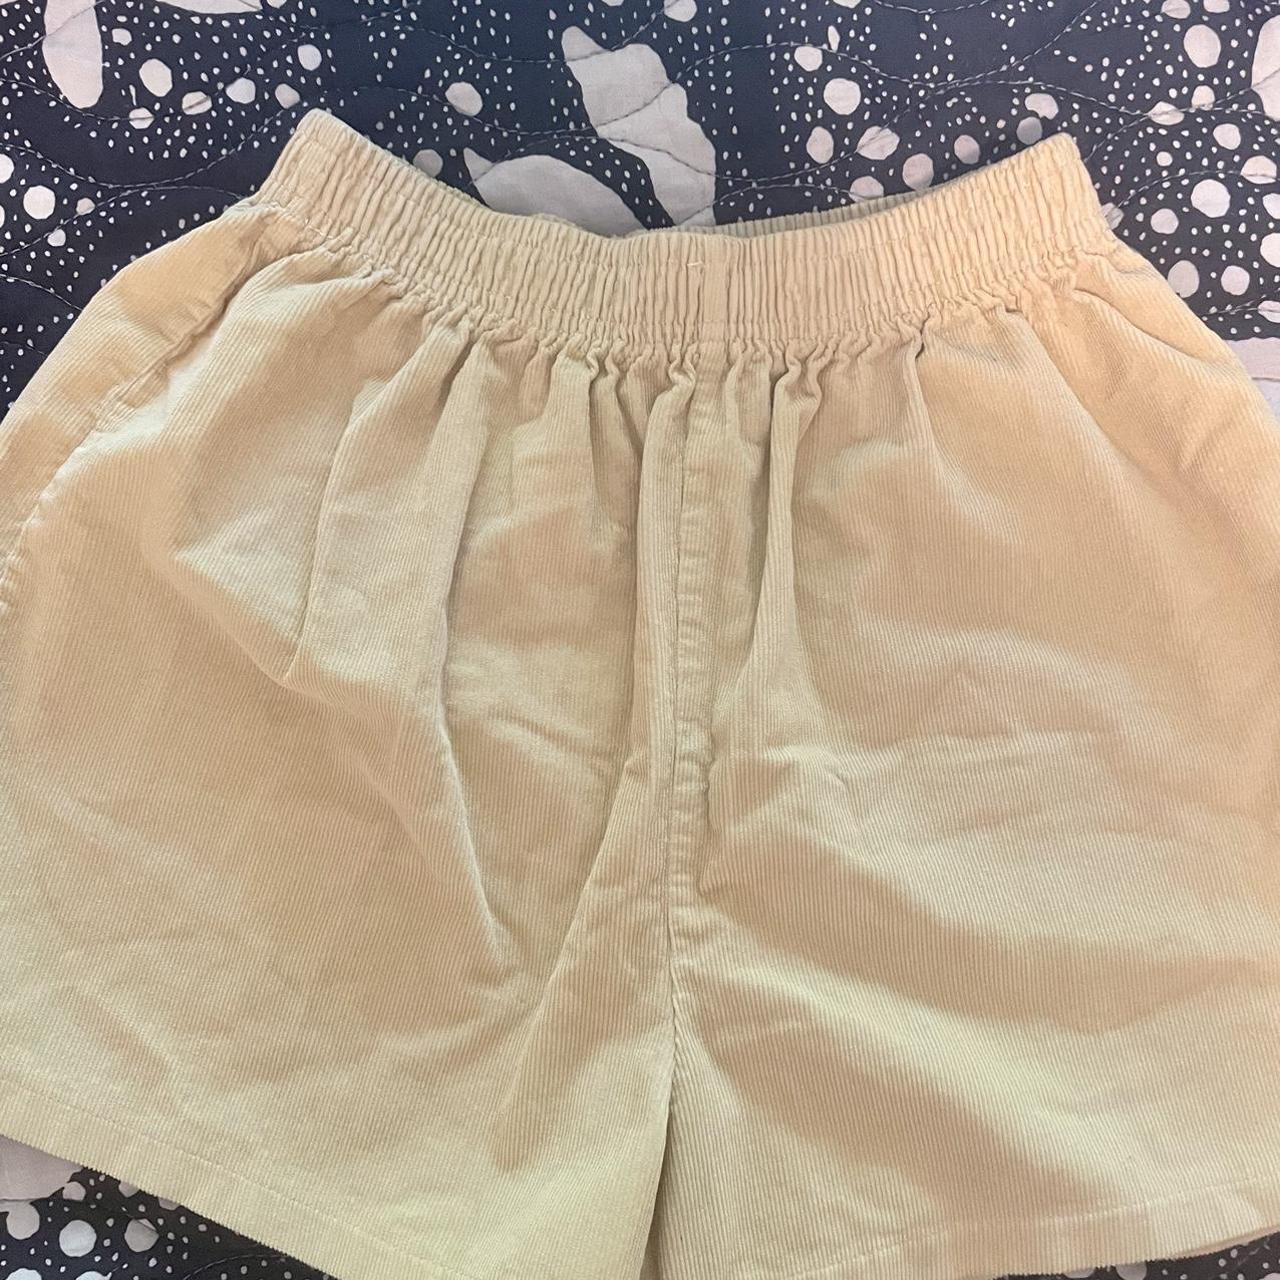 Urban Outfitters Women's Shorts